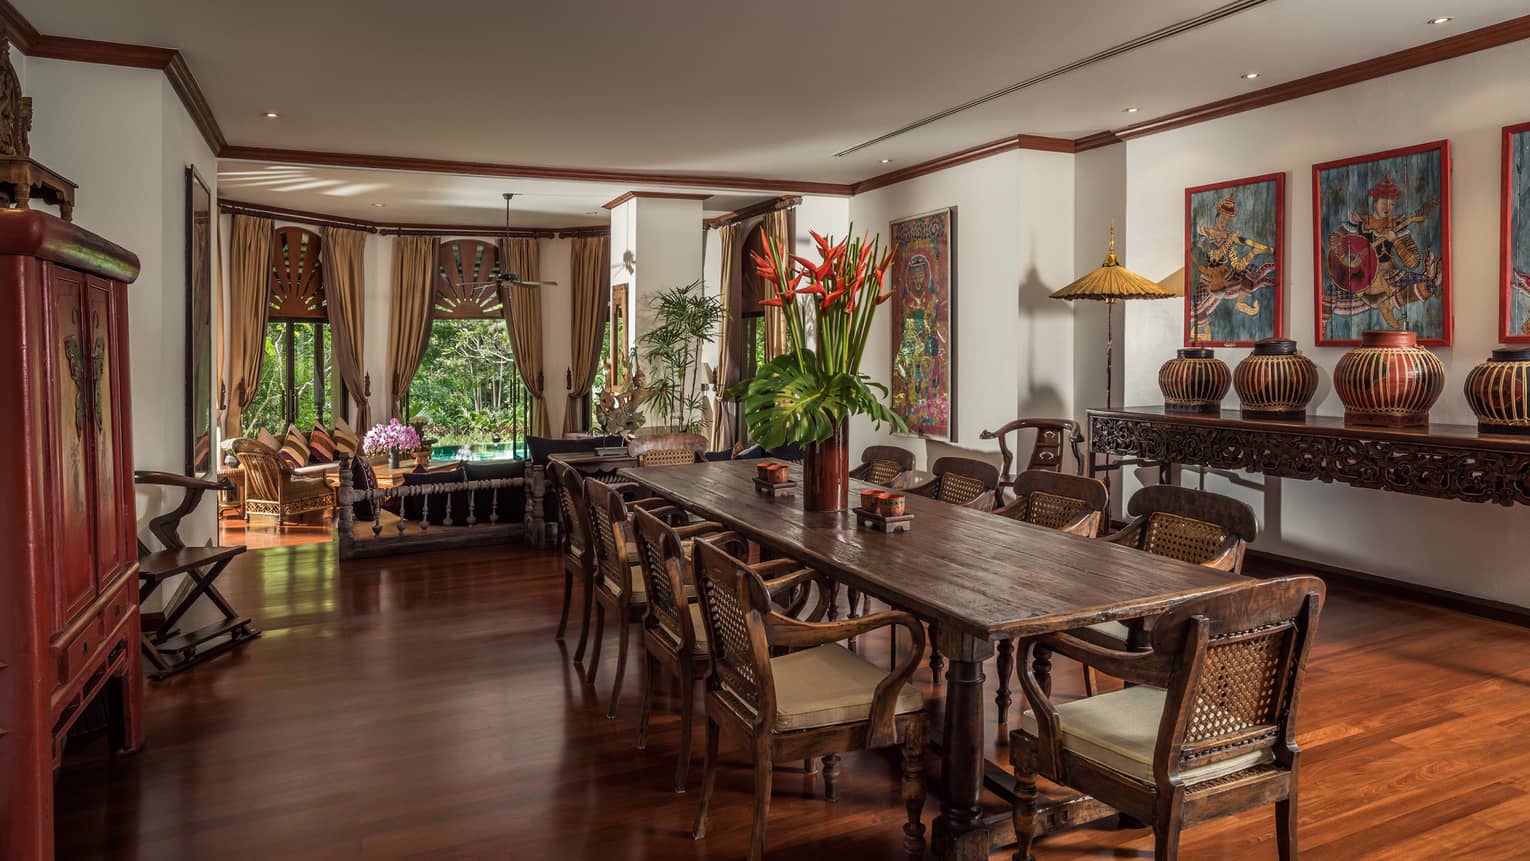 Long wood dining table with vase with tall tropical flowers in bright room